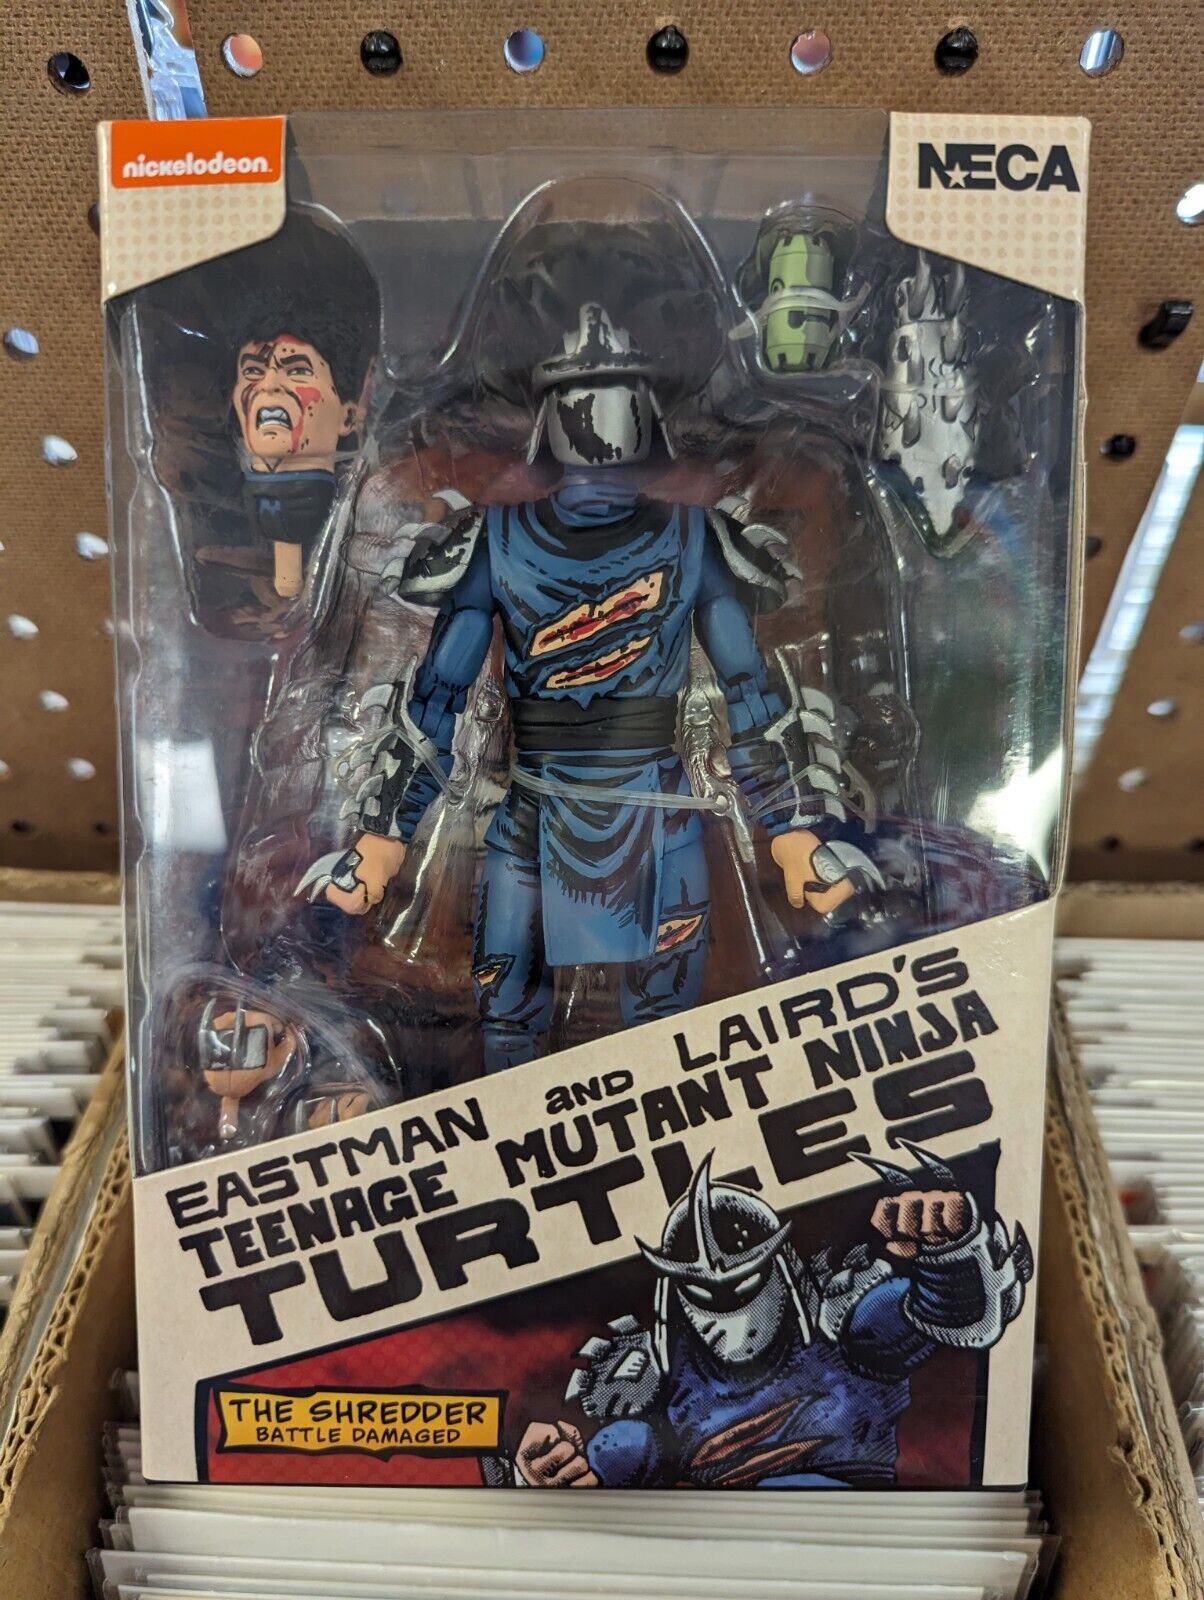 NECA TMNT Eastman And Laird's The Shredder Battle Damaged Action Figure